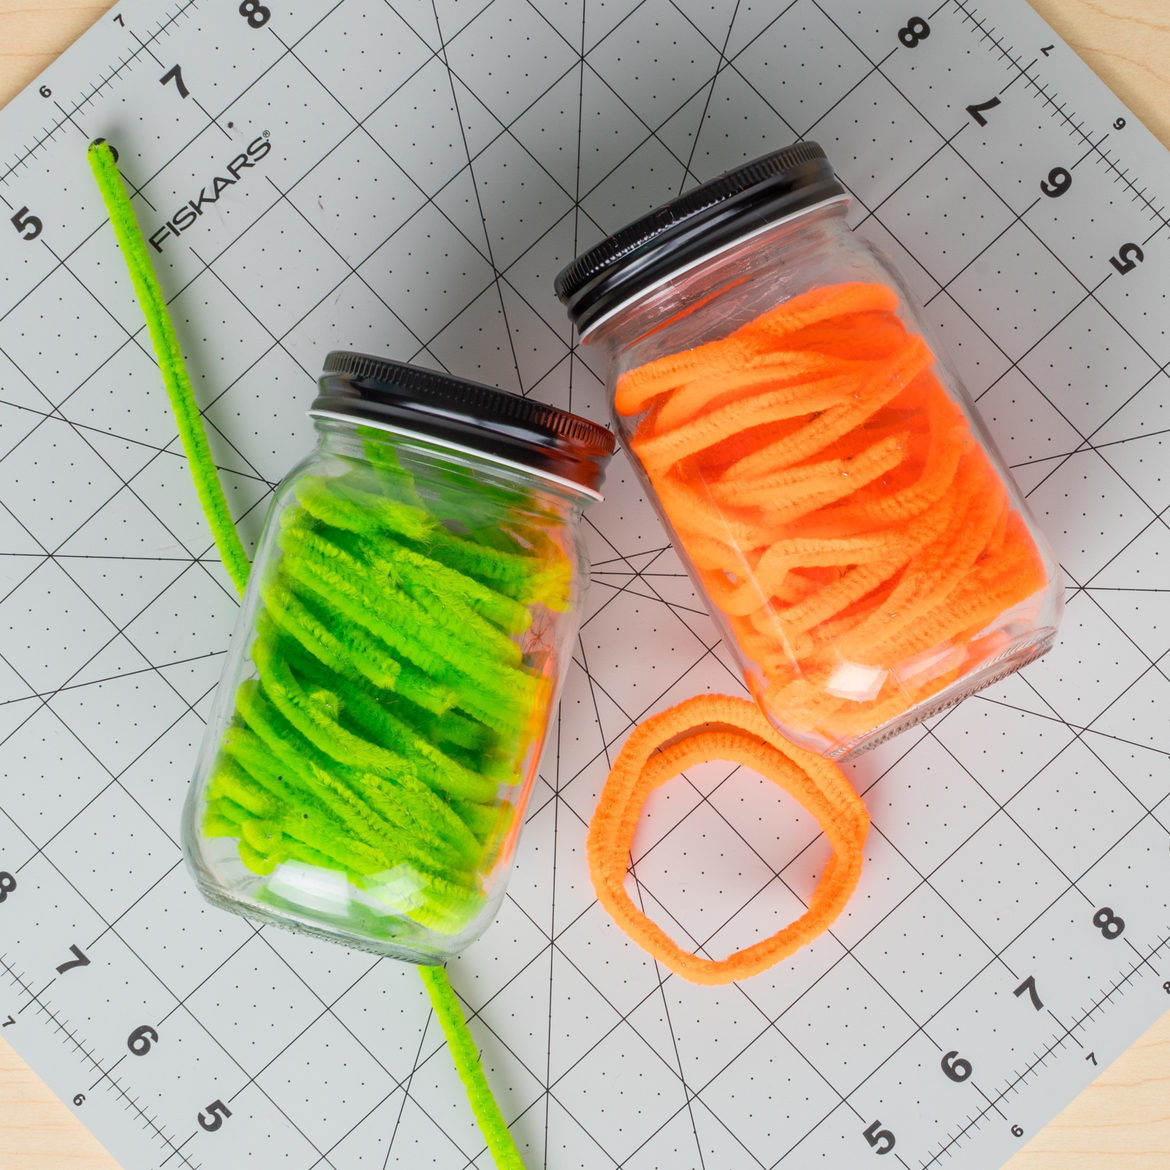 Jars filled with wound up pipe cleaners